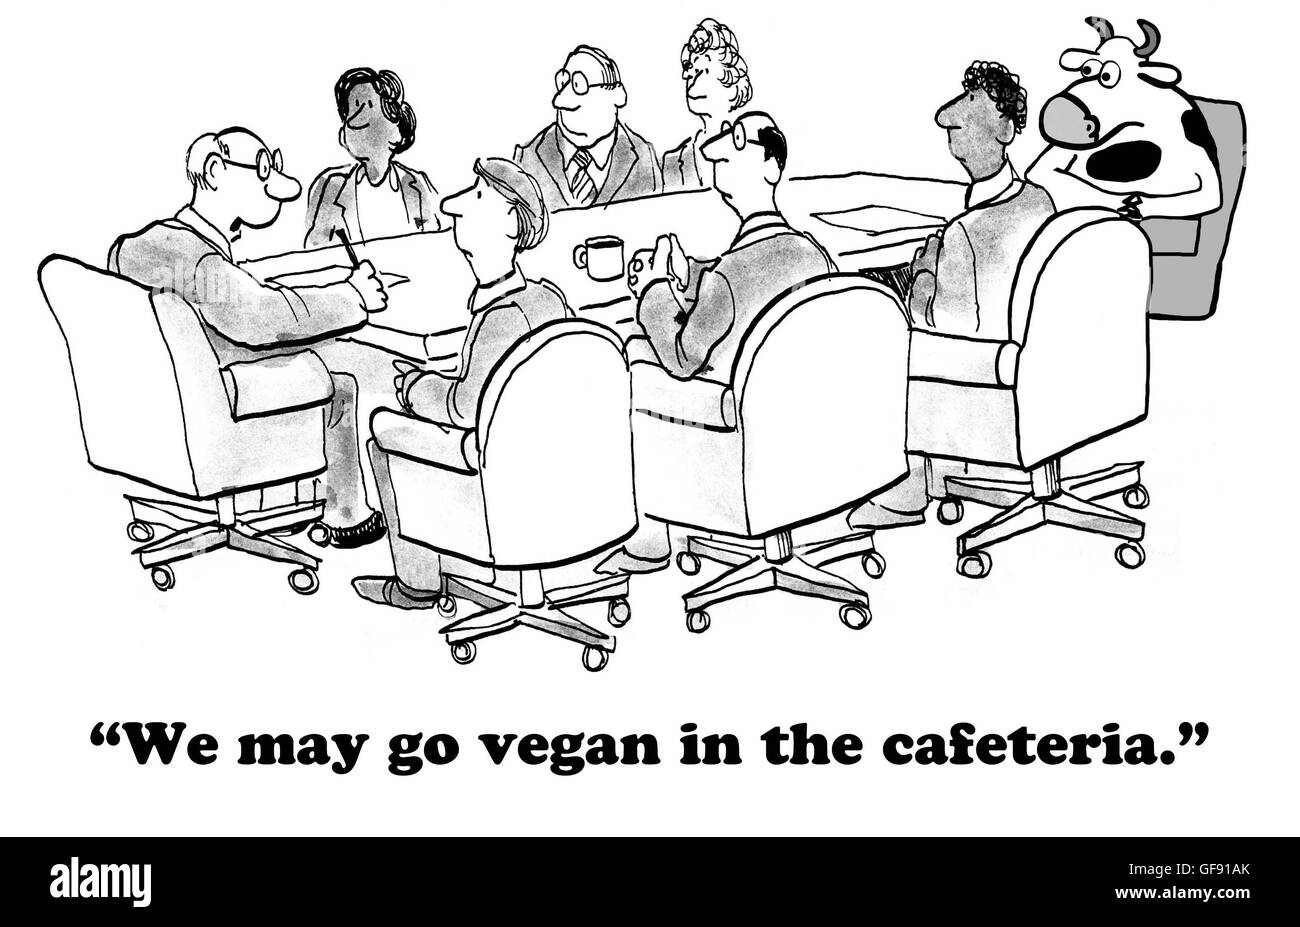 Business cartoon about responding to employees and, as a result, going vegan in the cafeteria. Stock Photo